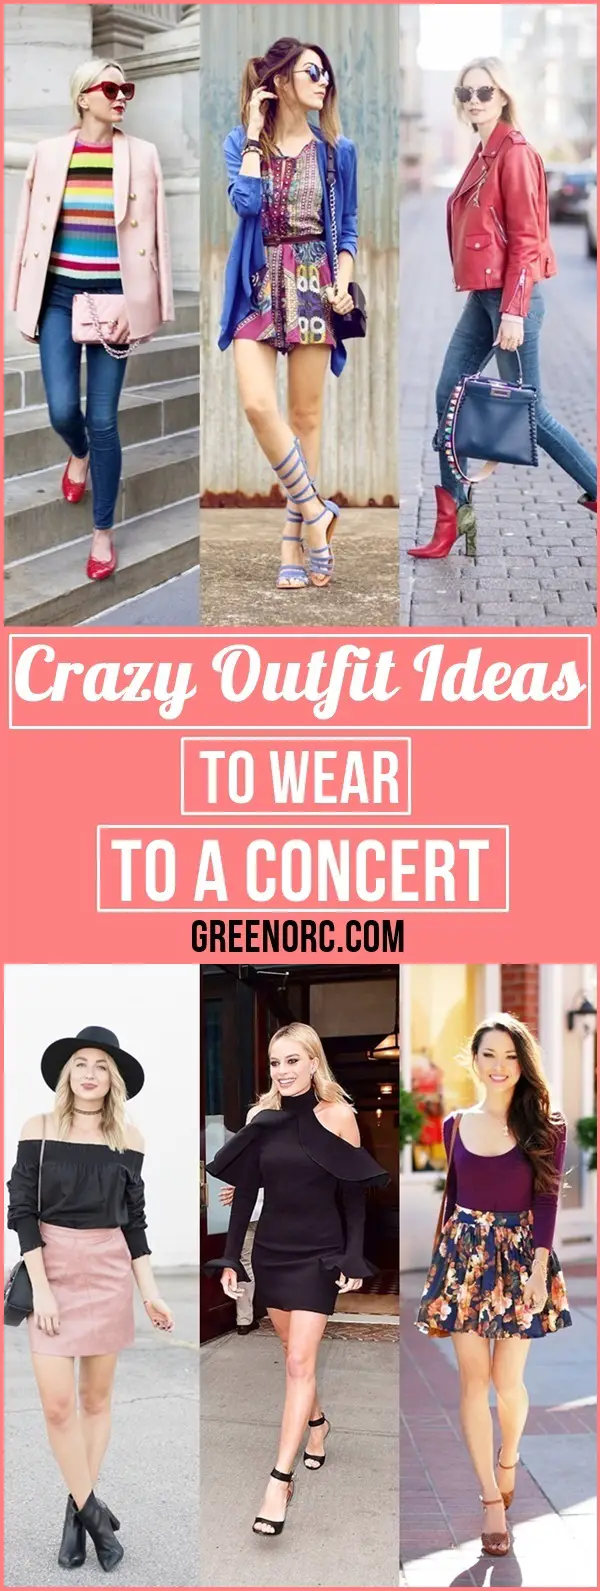 Crazy Outfit Ideas To Wear To A Concert